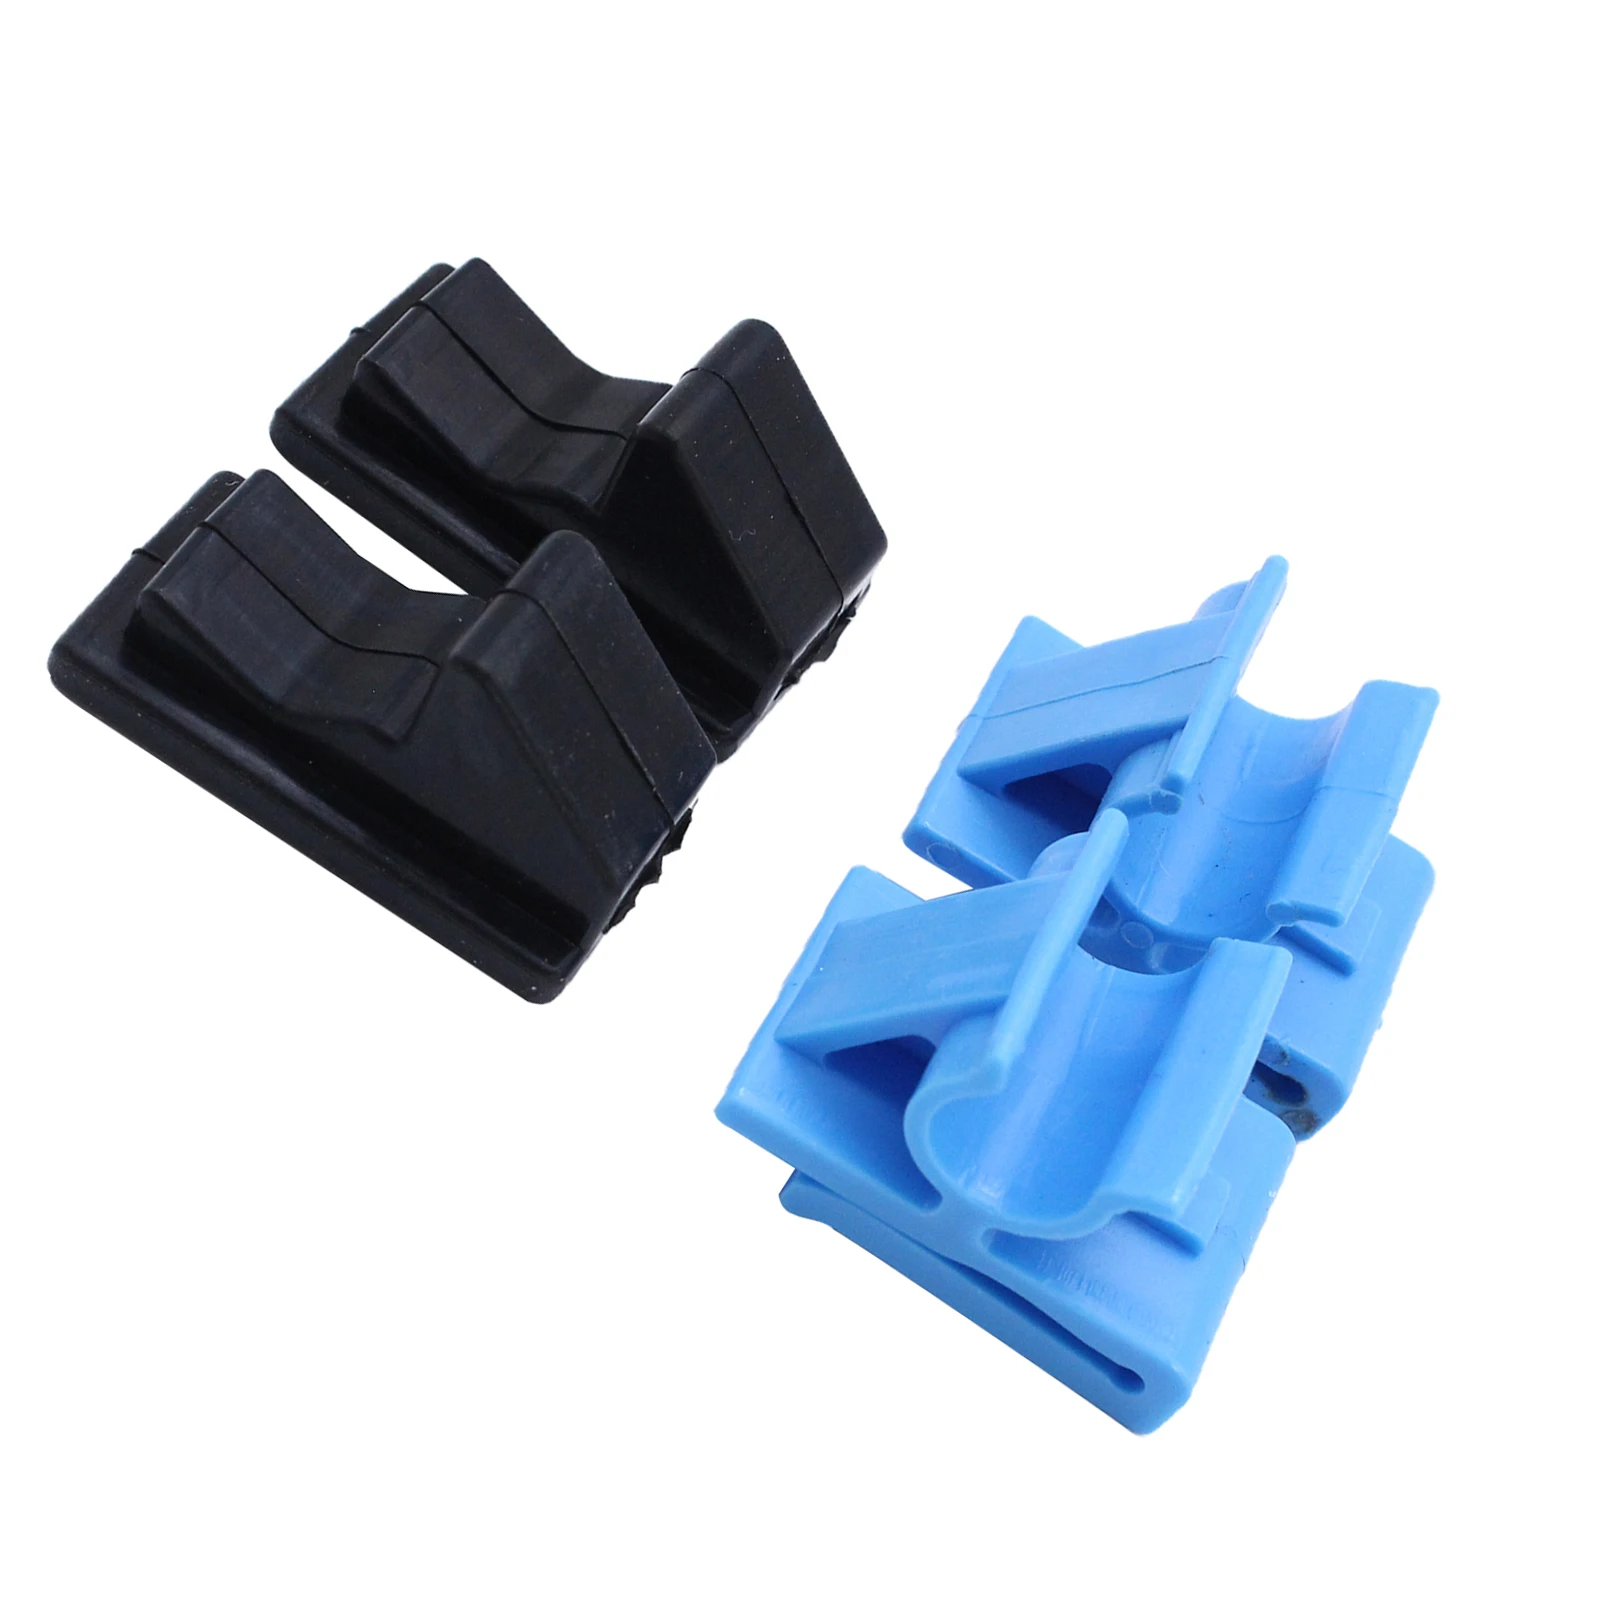 4Pieces Lower Glove Box Clip Bump Stop Sets ,Modified Fix, for Holden Commdore VY  WK WL 2002-2006